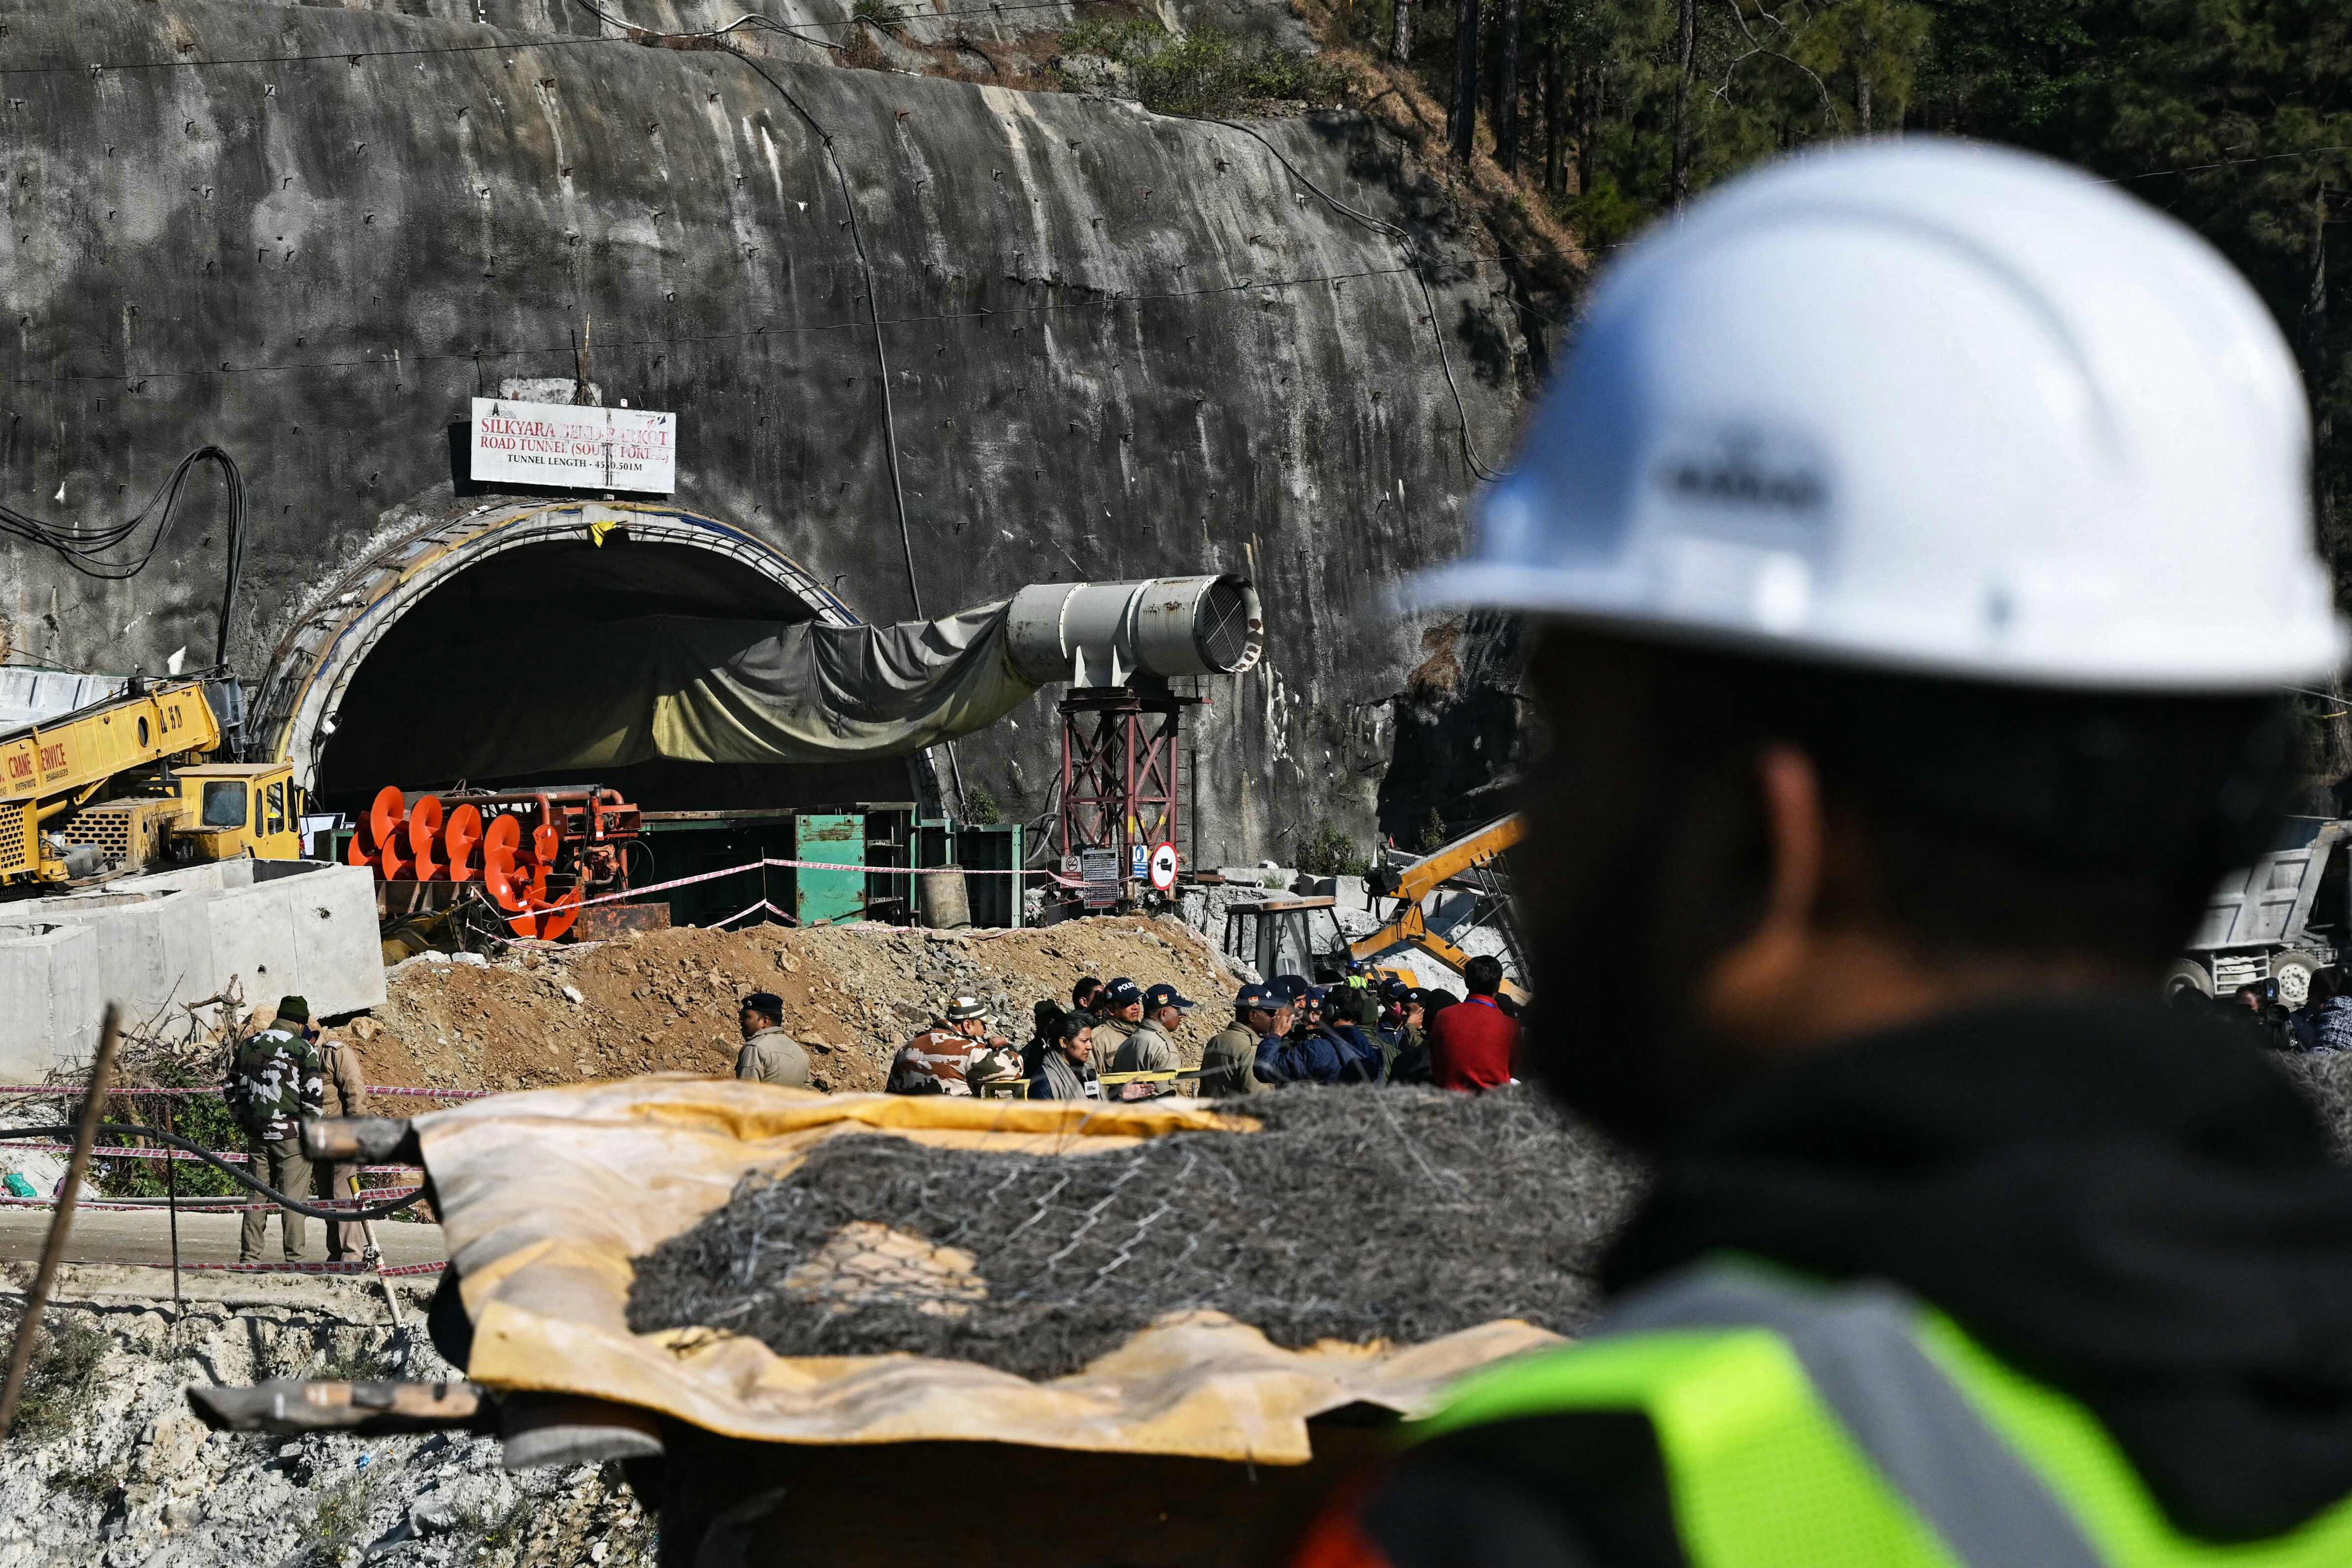 uttarakhand tunnel rescue enters last leg with 41 workers trapped